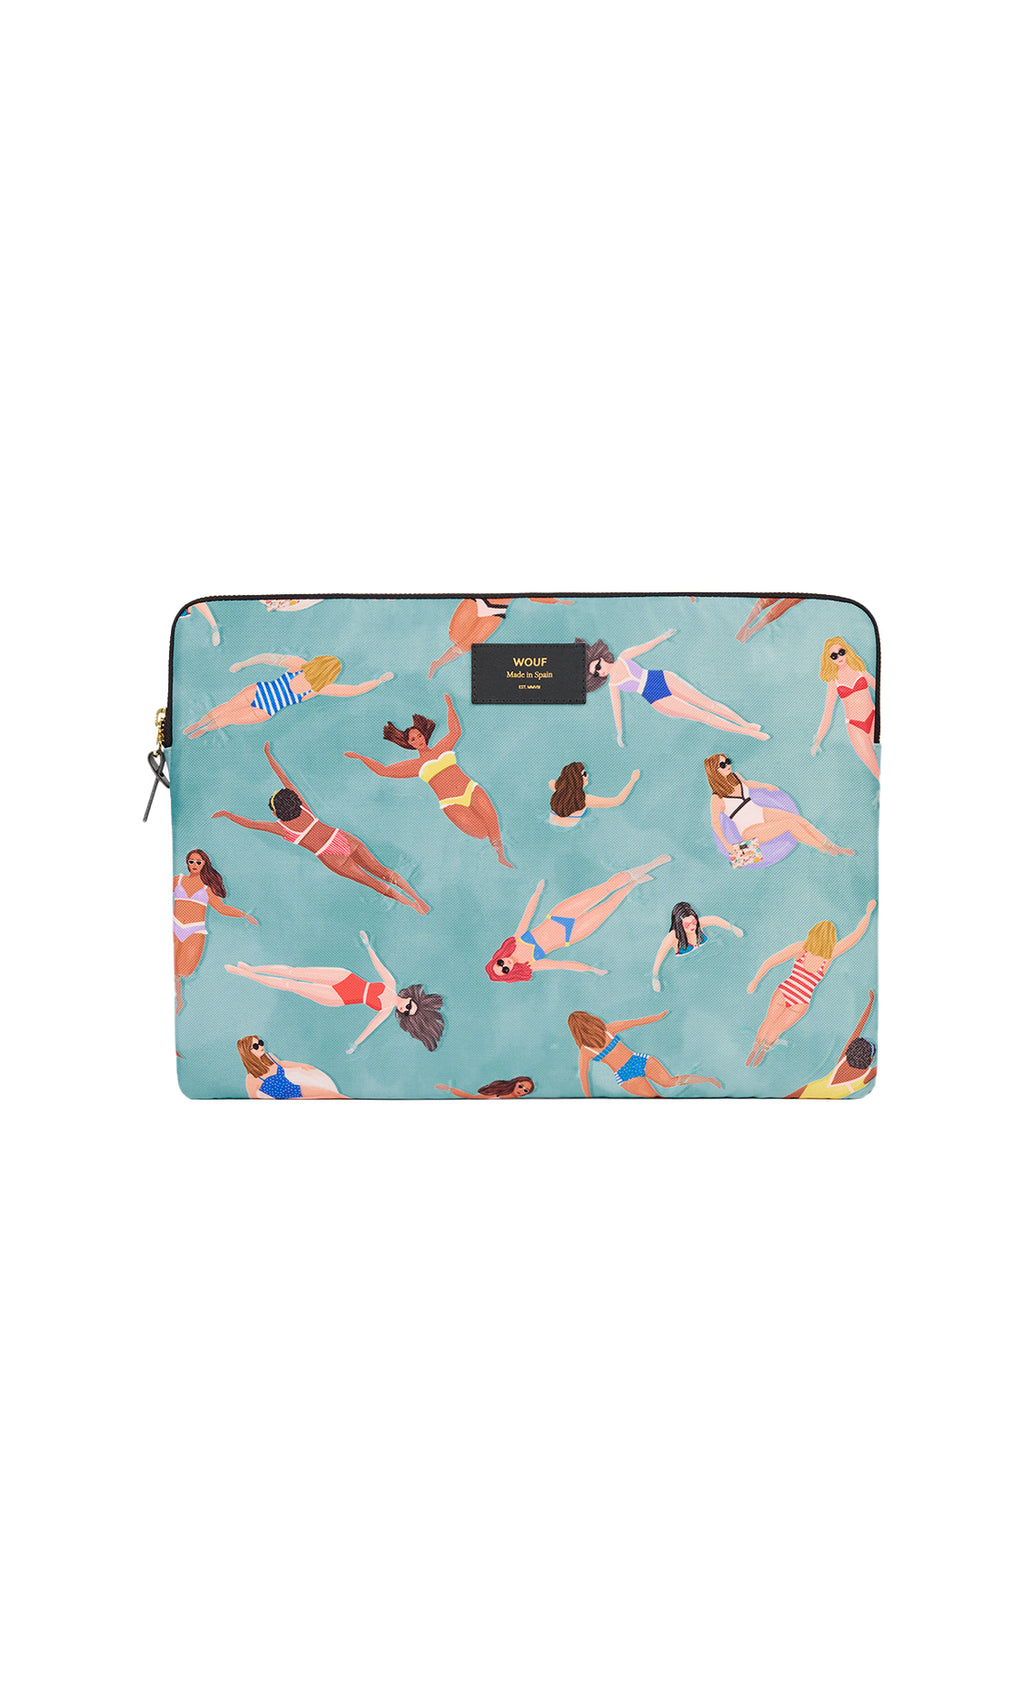 WOUF SWIMMERS LAPTOP SLEEVE 15"